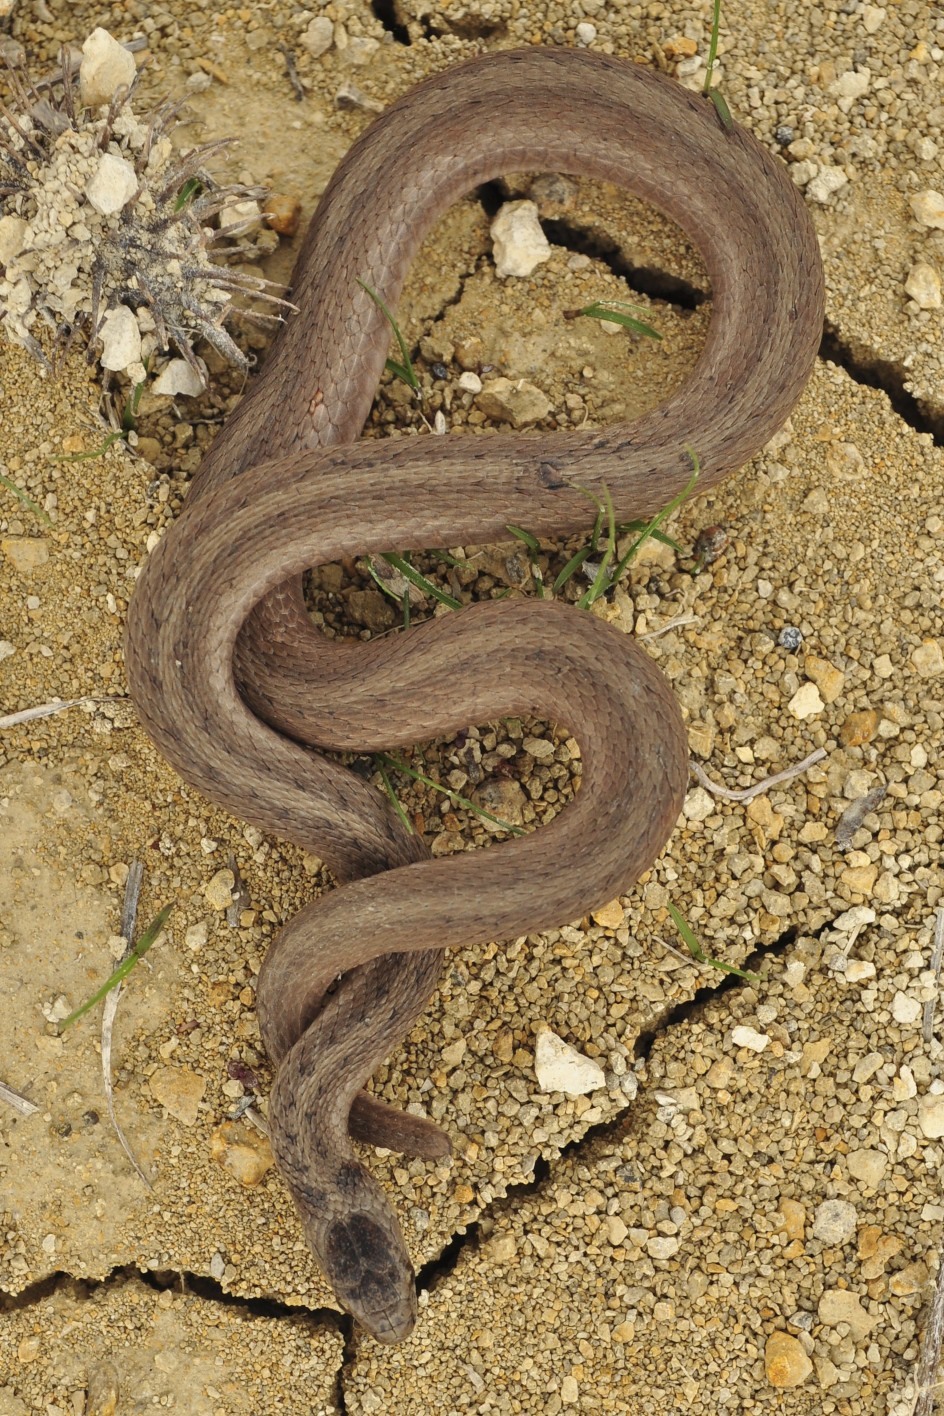 Texas Brown Snake Facts and Pictures